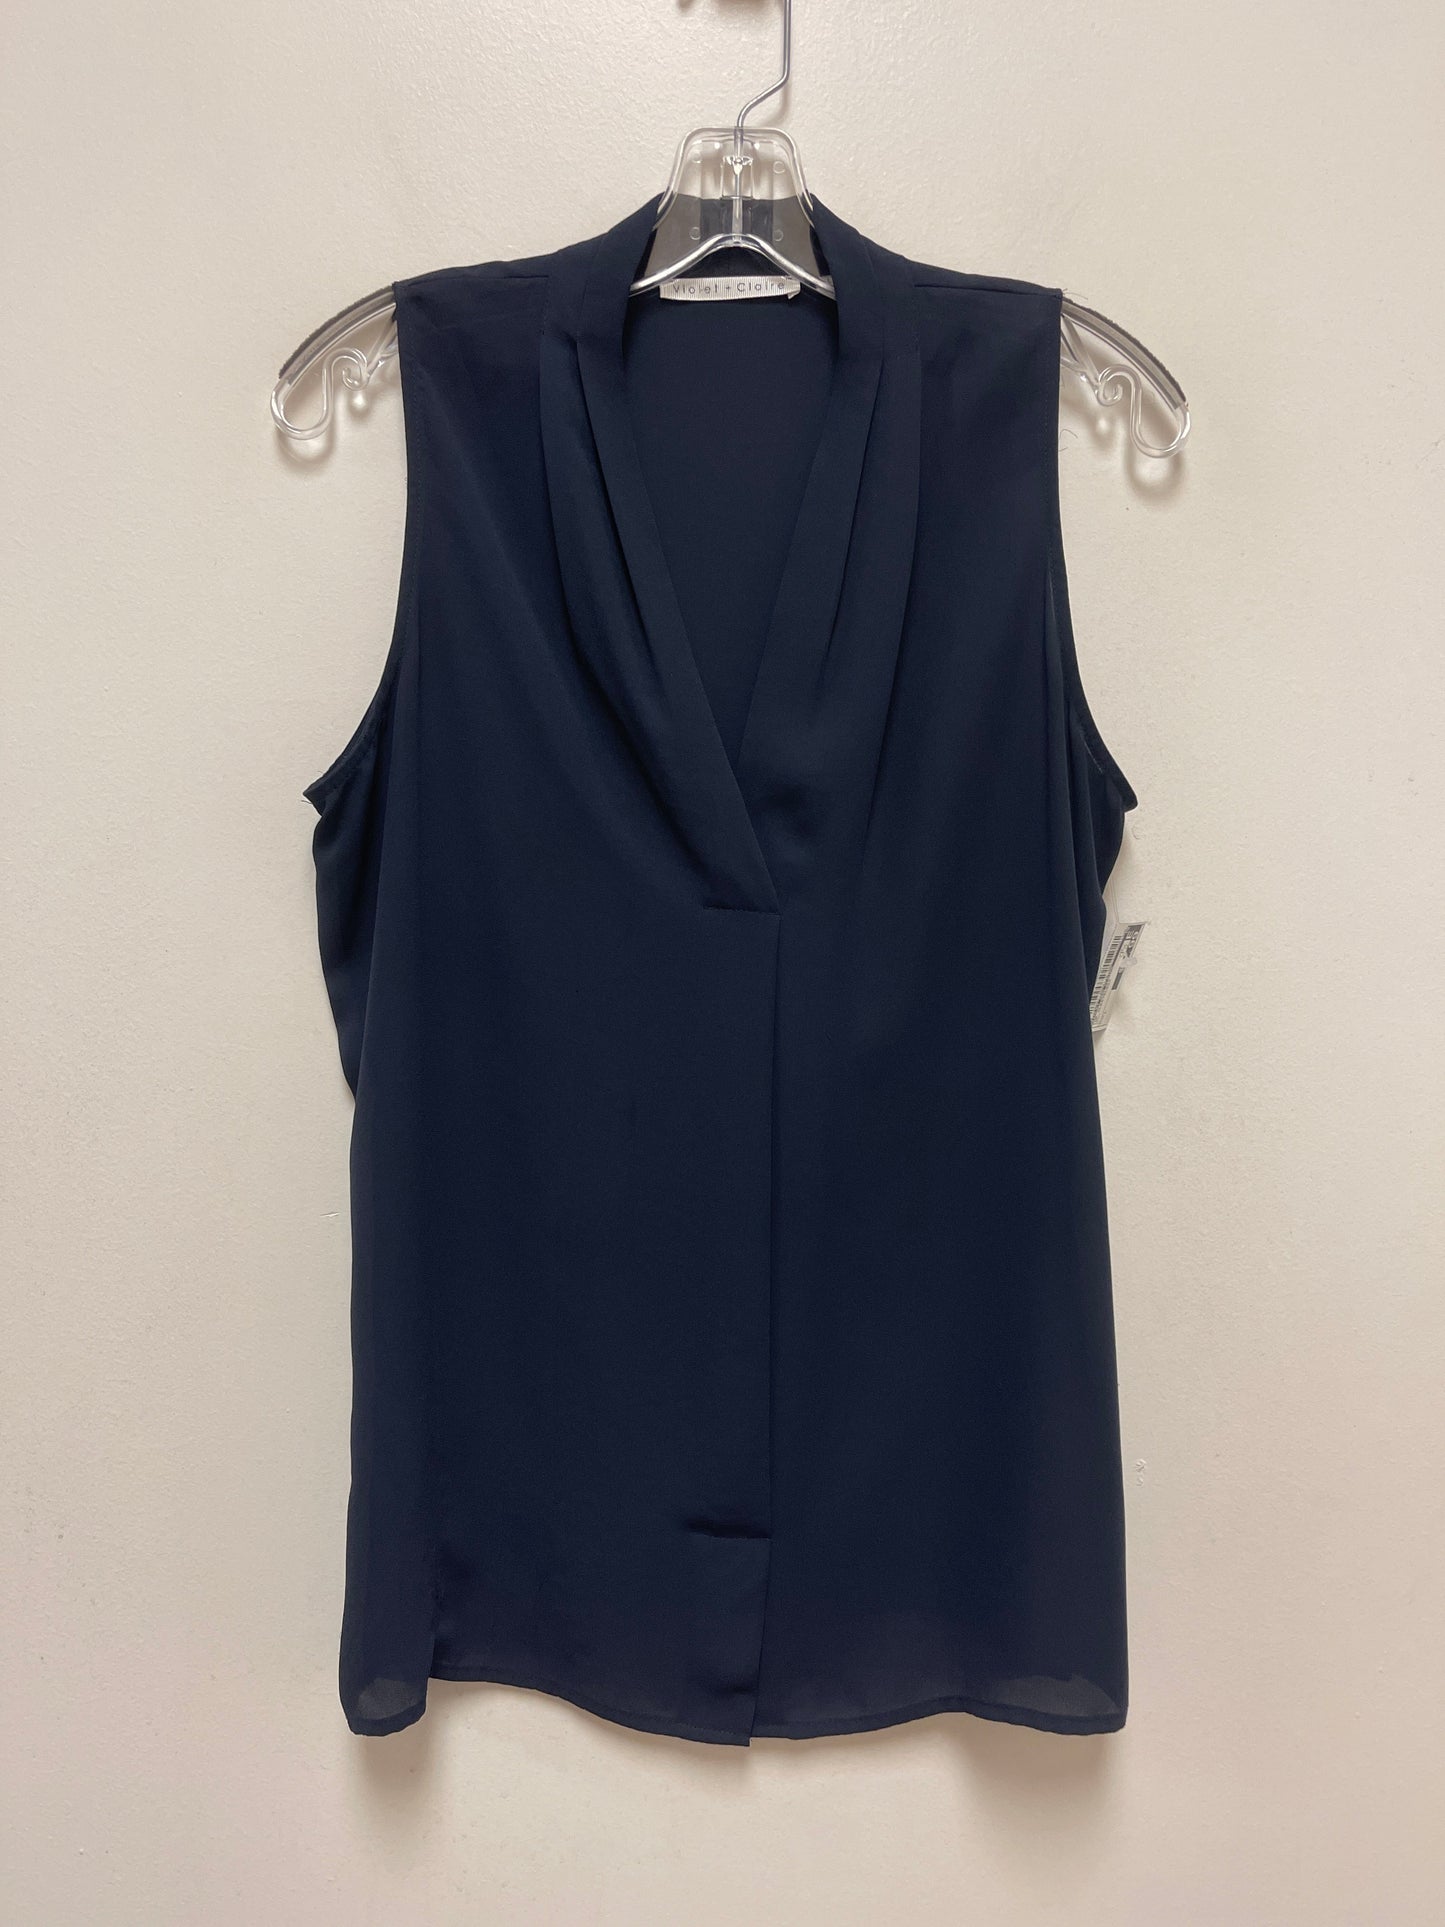 Top Sleeveless By Violet And Claire  Size: L